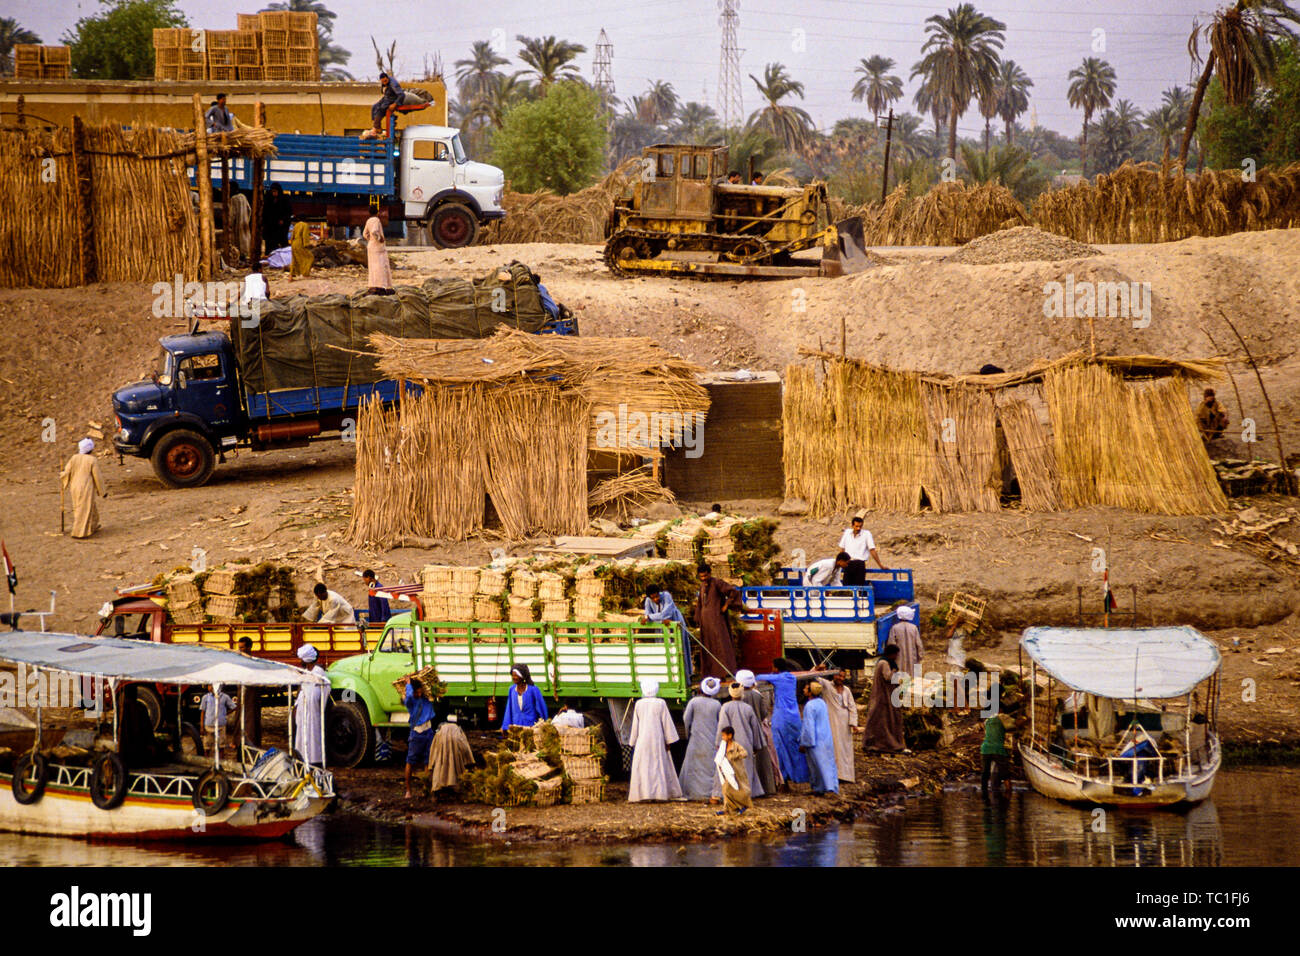 Luxor, Egypt. Tucks and boats loading and unloading reeds and fodder on the banks of the Nile. Photo: © Simon Grosset. Archive: Image digitised from a Stock Photo